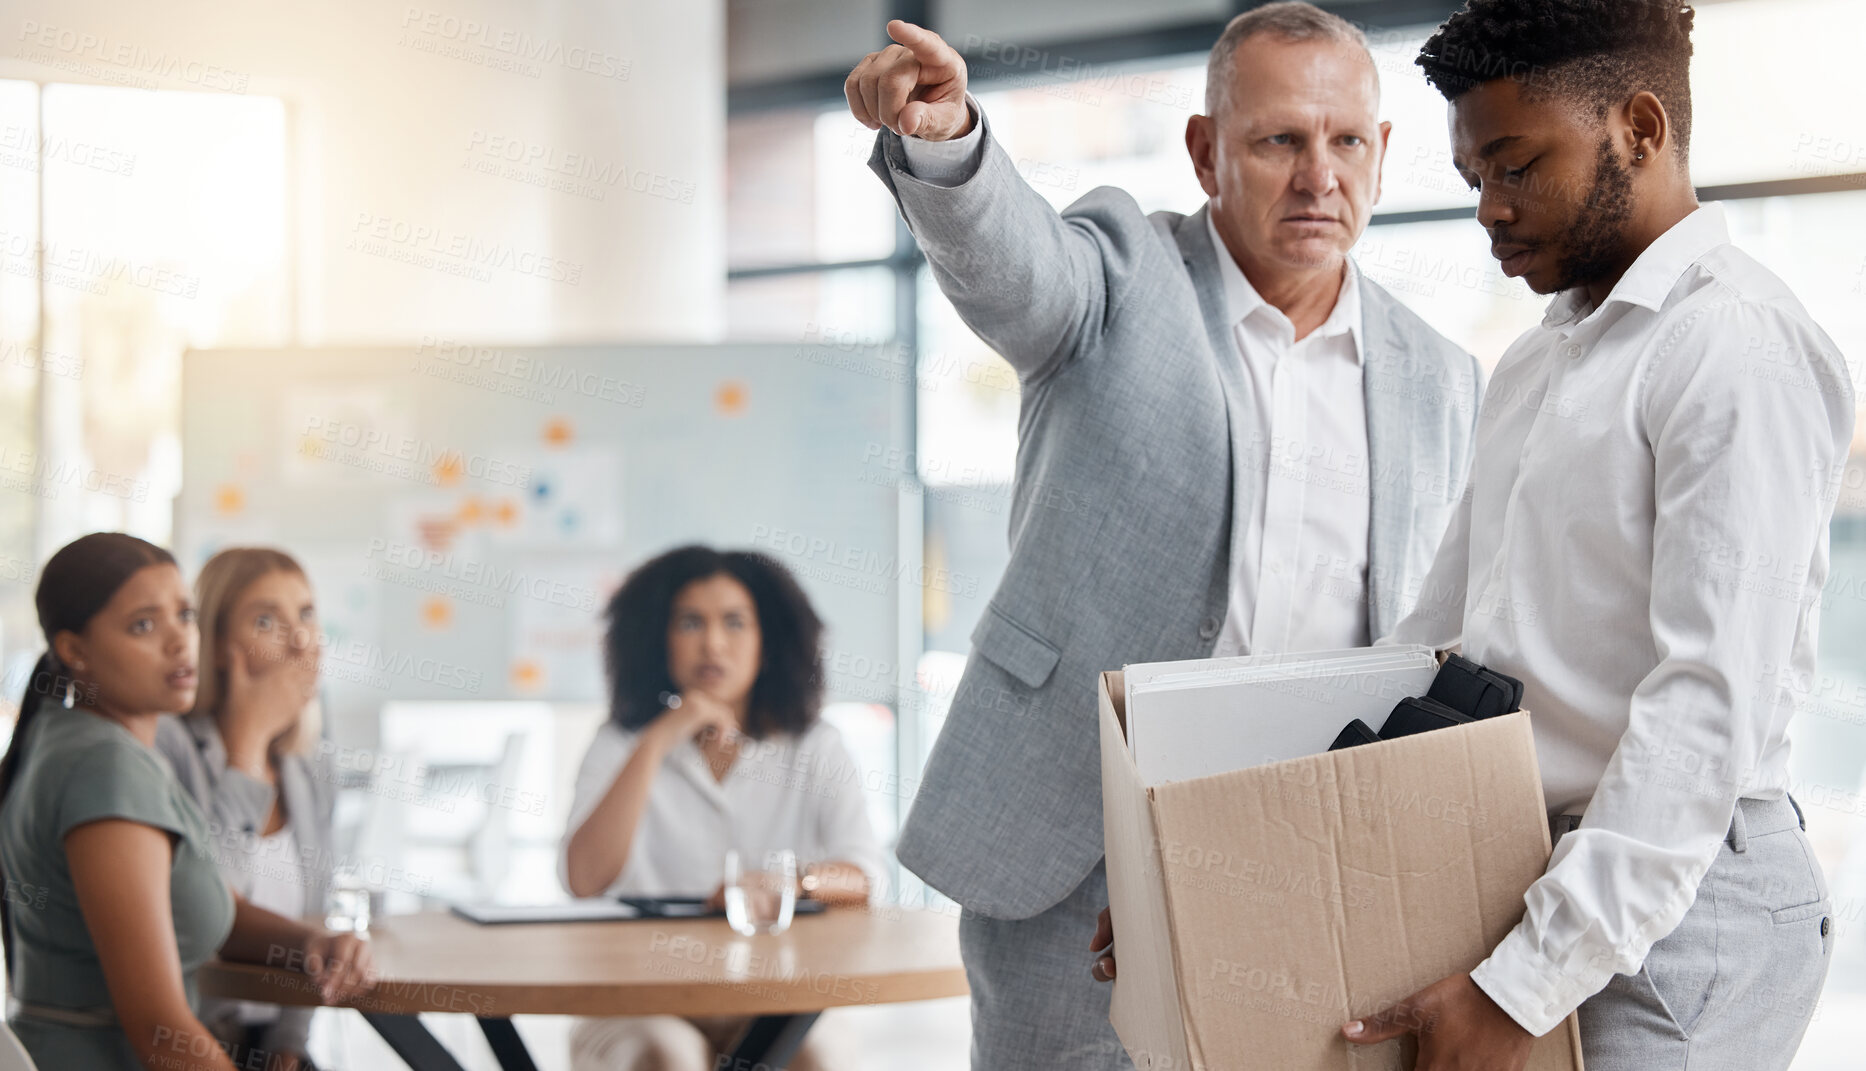 Buy stock photo Black man, sad and fired by boss in a meeting holding a box in disappointment at the office. Manager or company leader pointing to the exit and firing employee in front of colleagues at the workplace